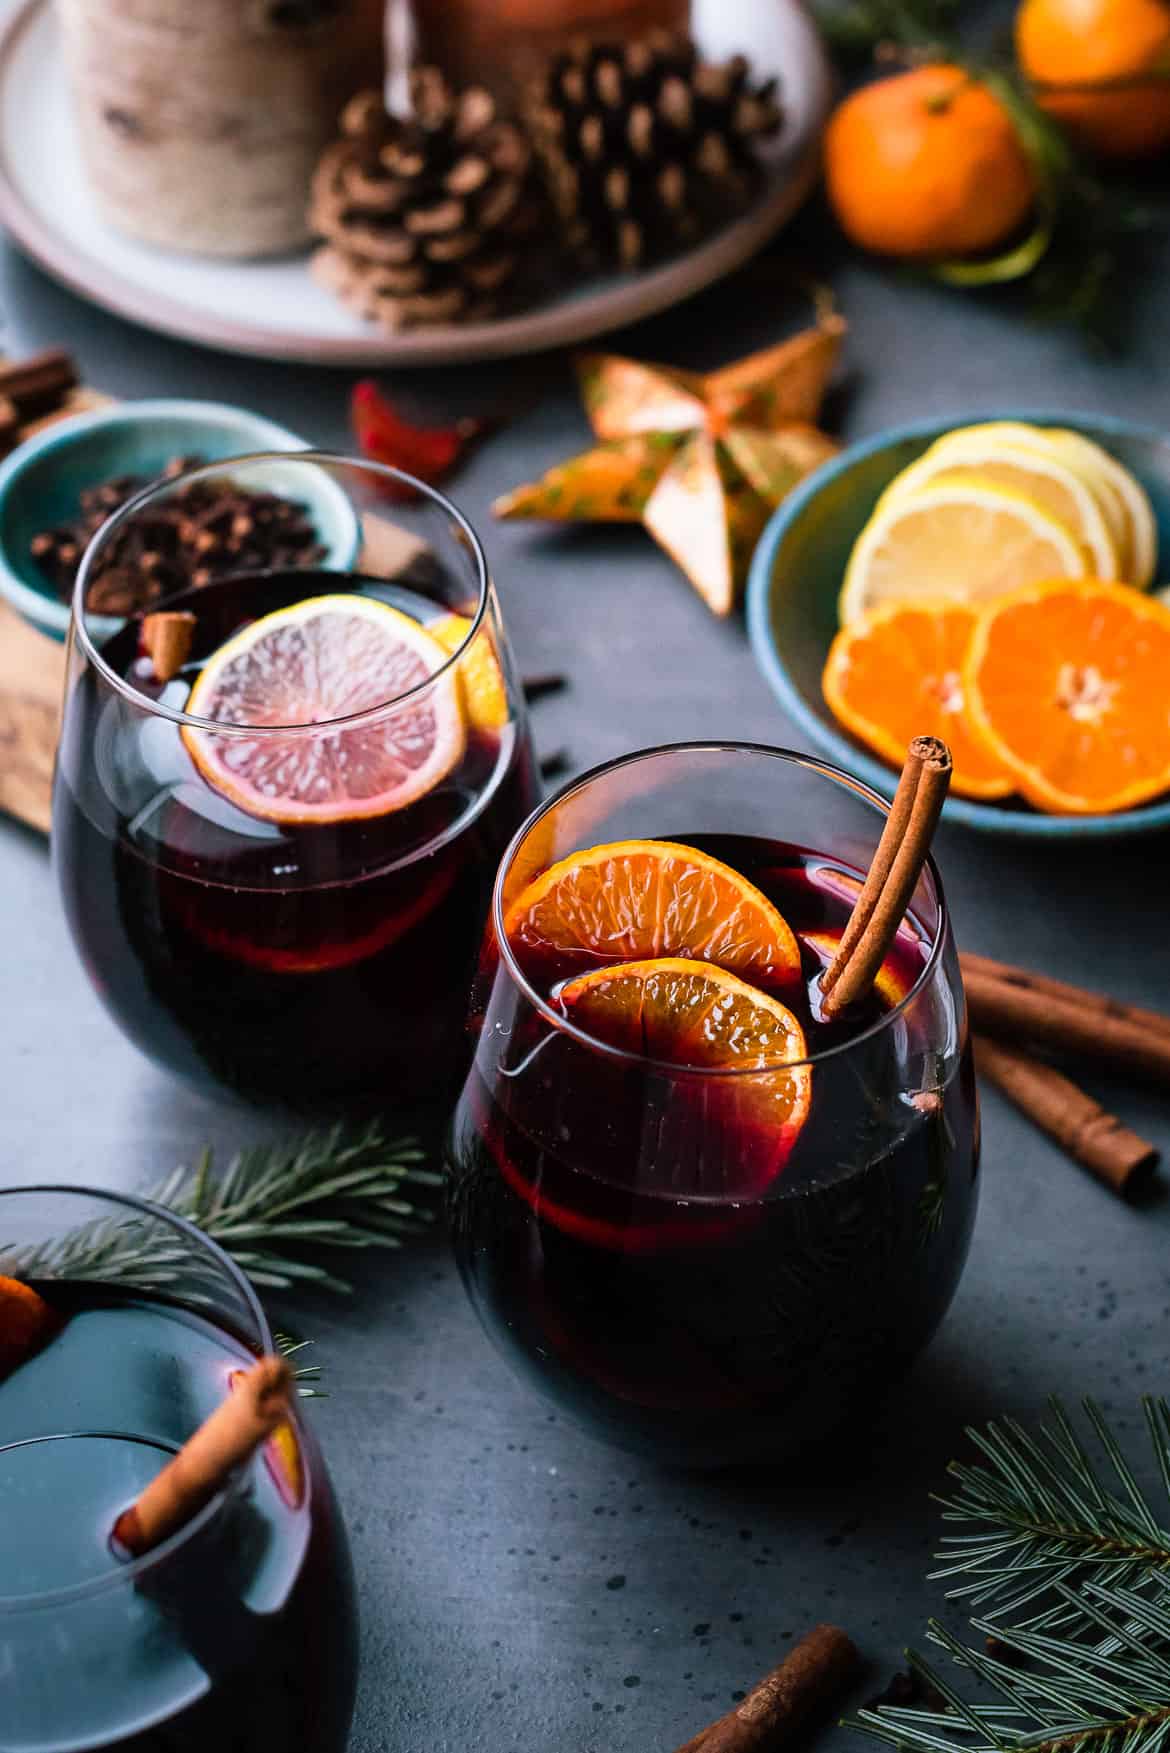 How to make mulled wine at home - BoozNow